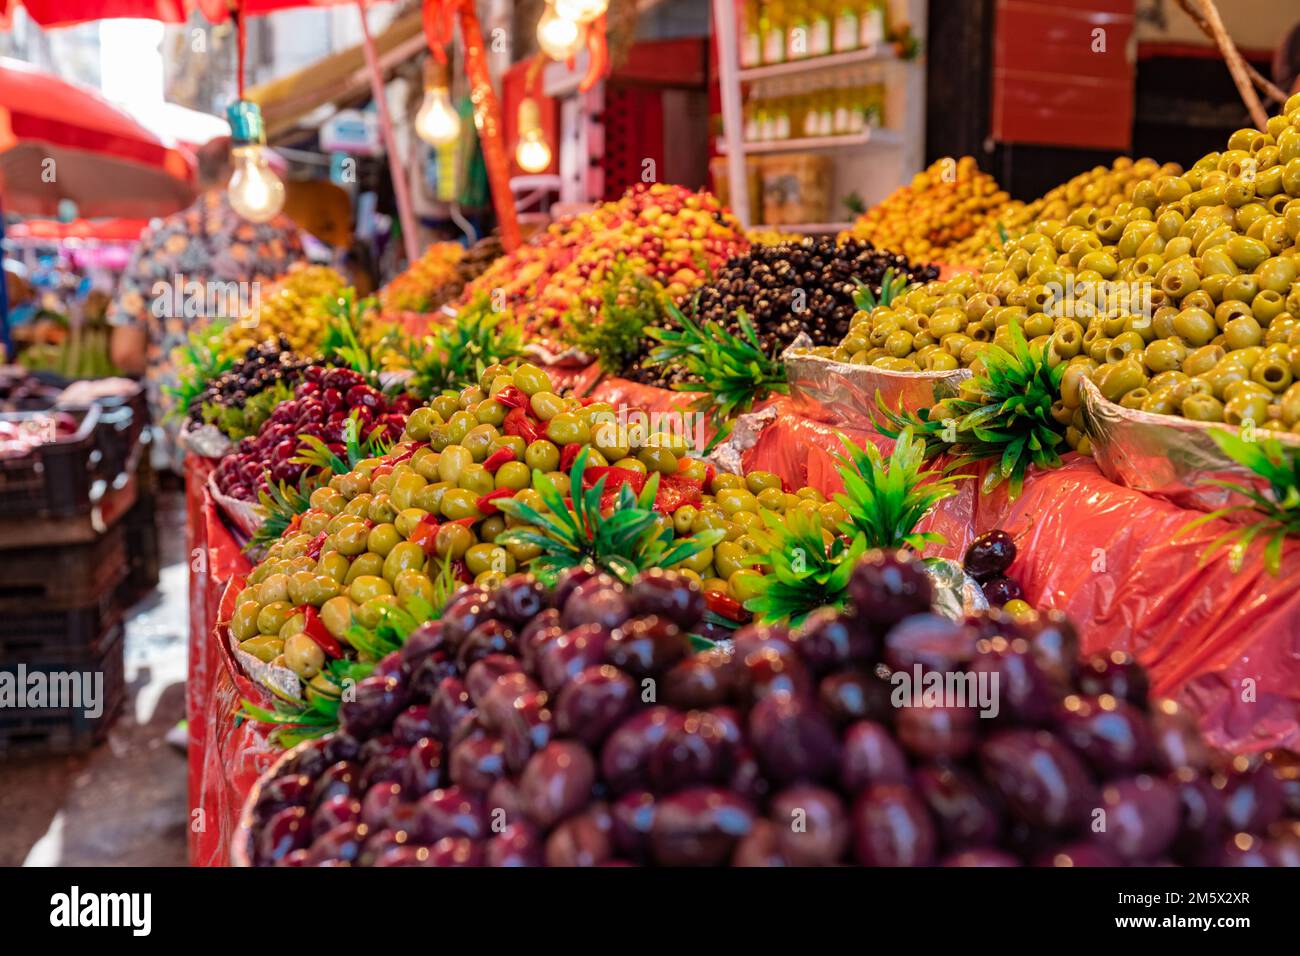 A lot of different olives on display at a public market. Tasty juicy olives on a market stall. Stock Photo